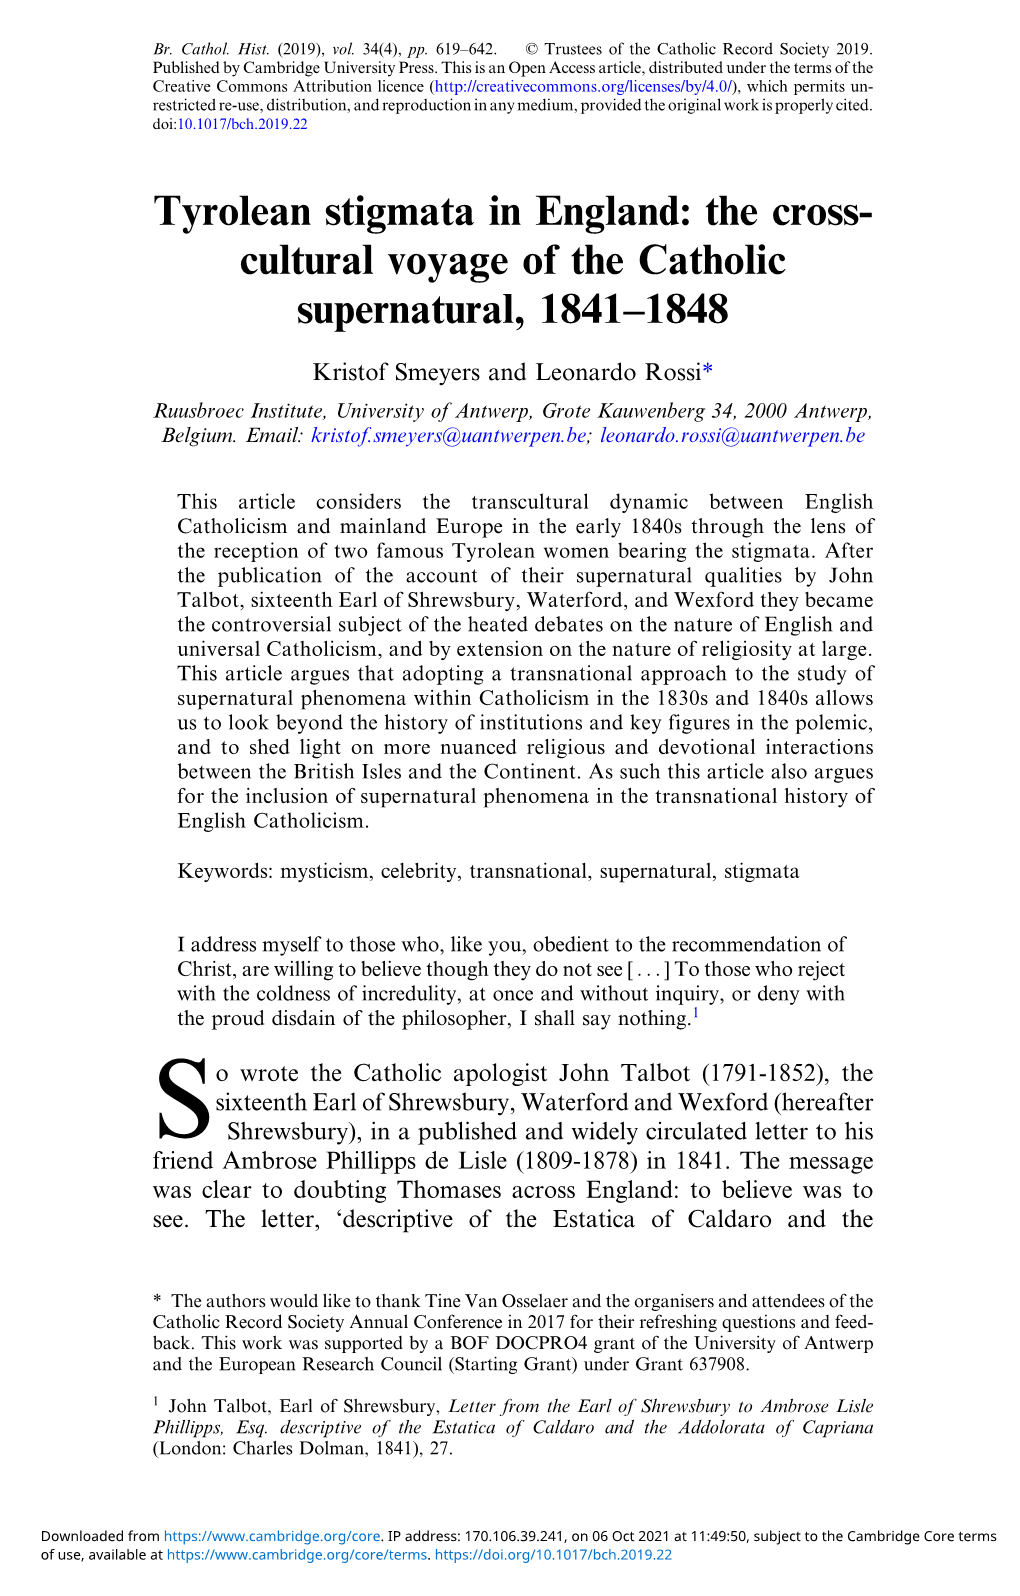 Tyrolean Stigmata in England: the Cross-Cultural Voyage of the Catholic Supernatural, 1841-1848